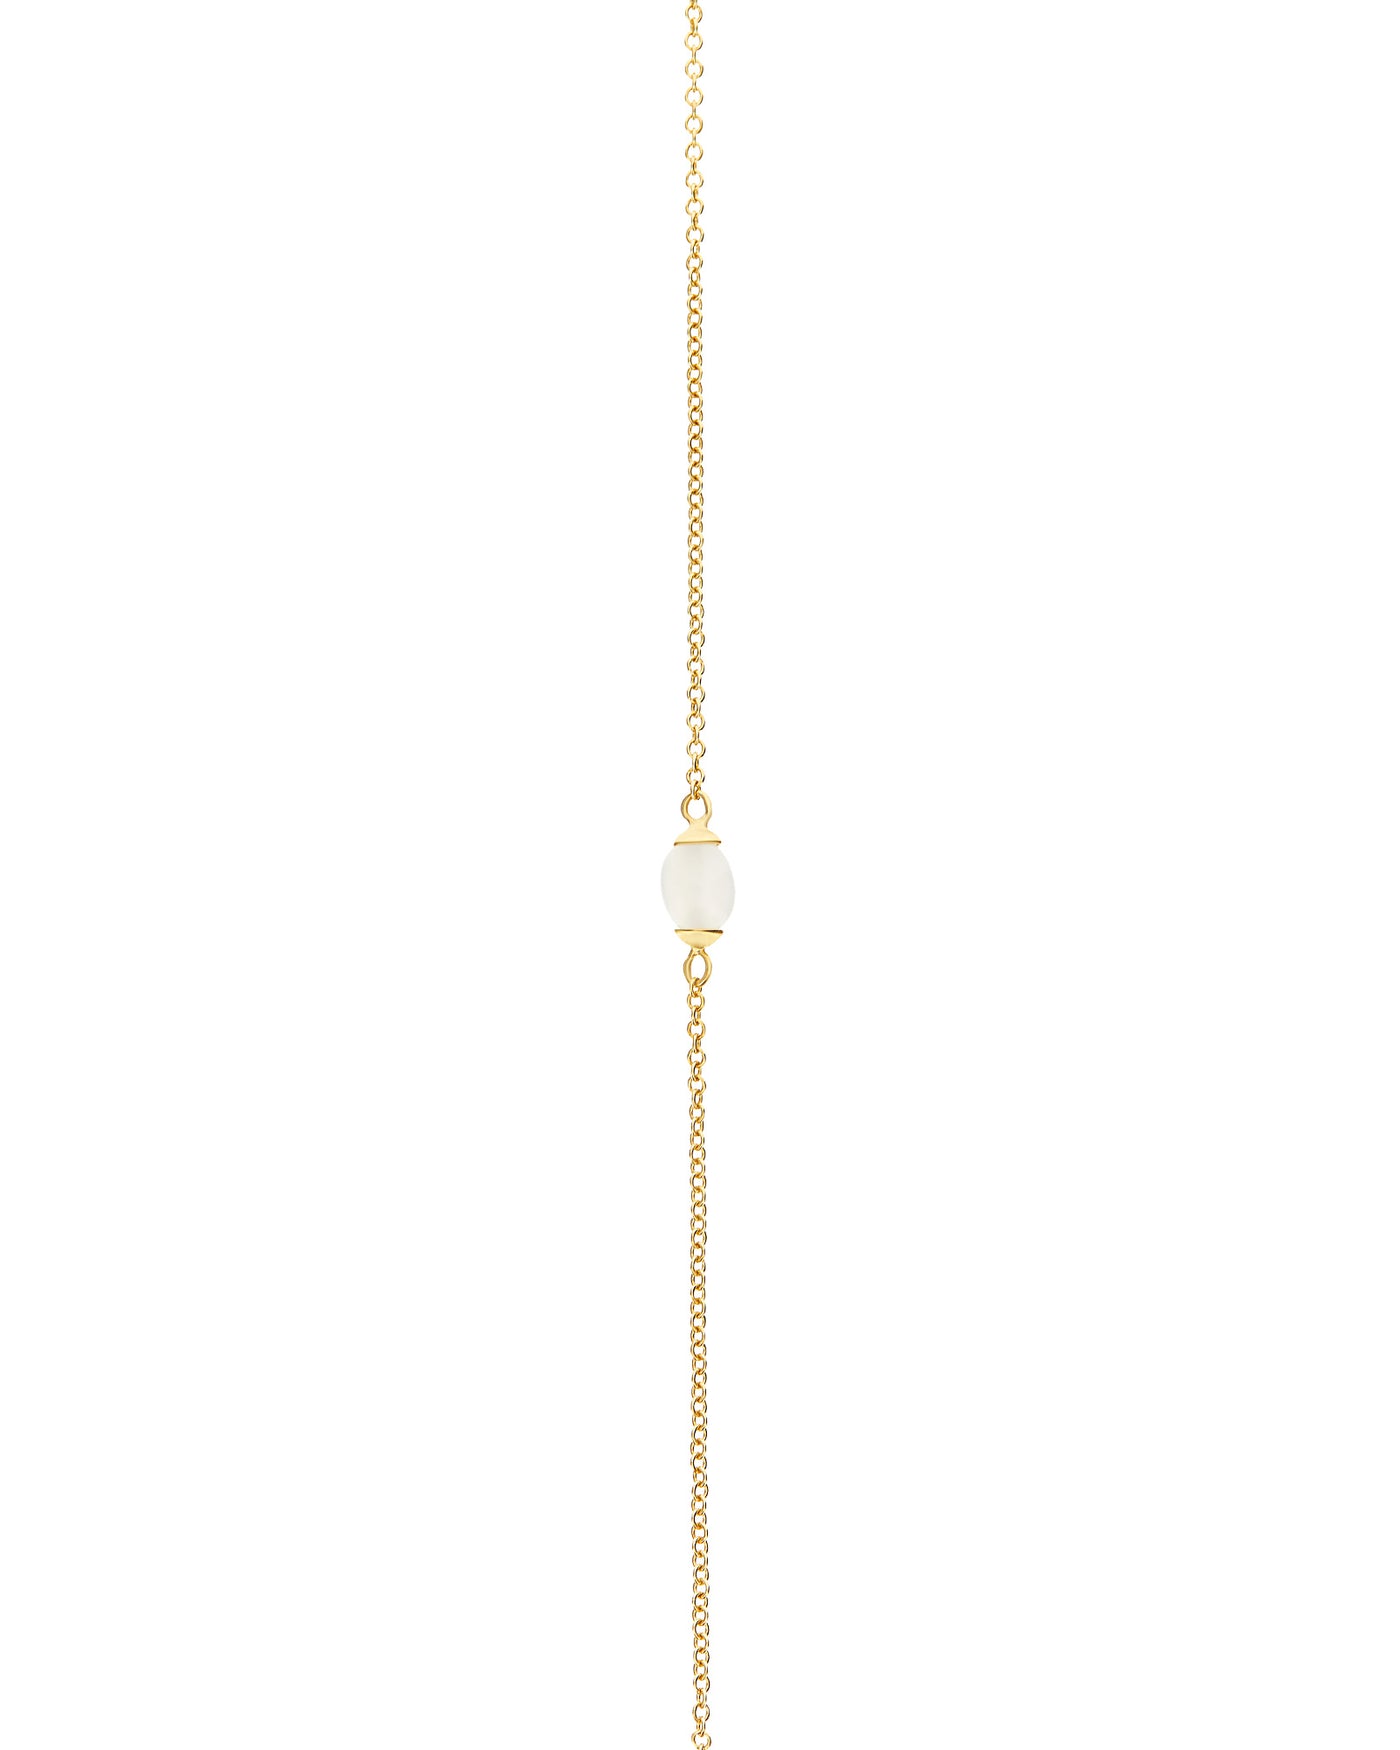 "White desert" gold and moonstone necklace (small)